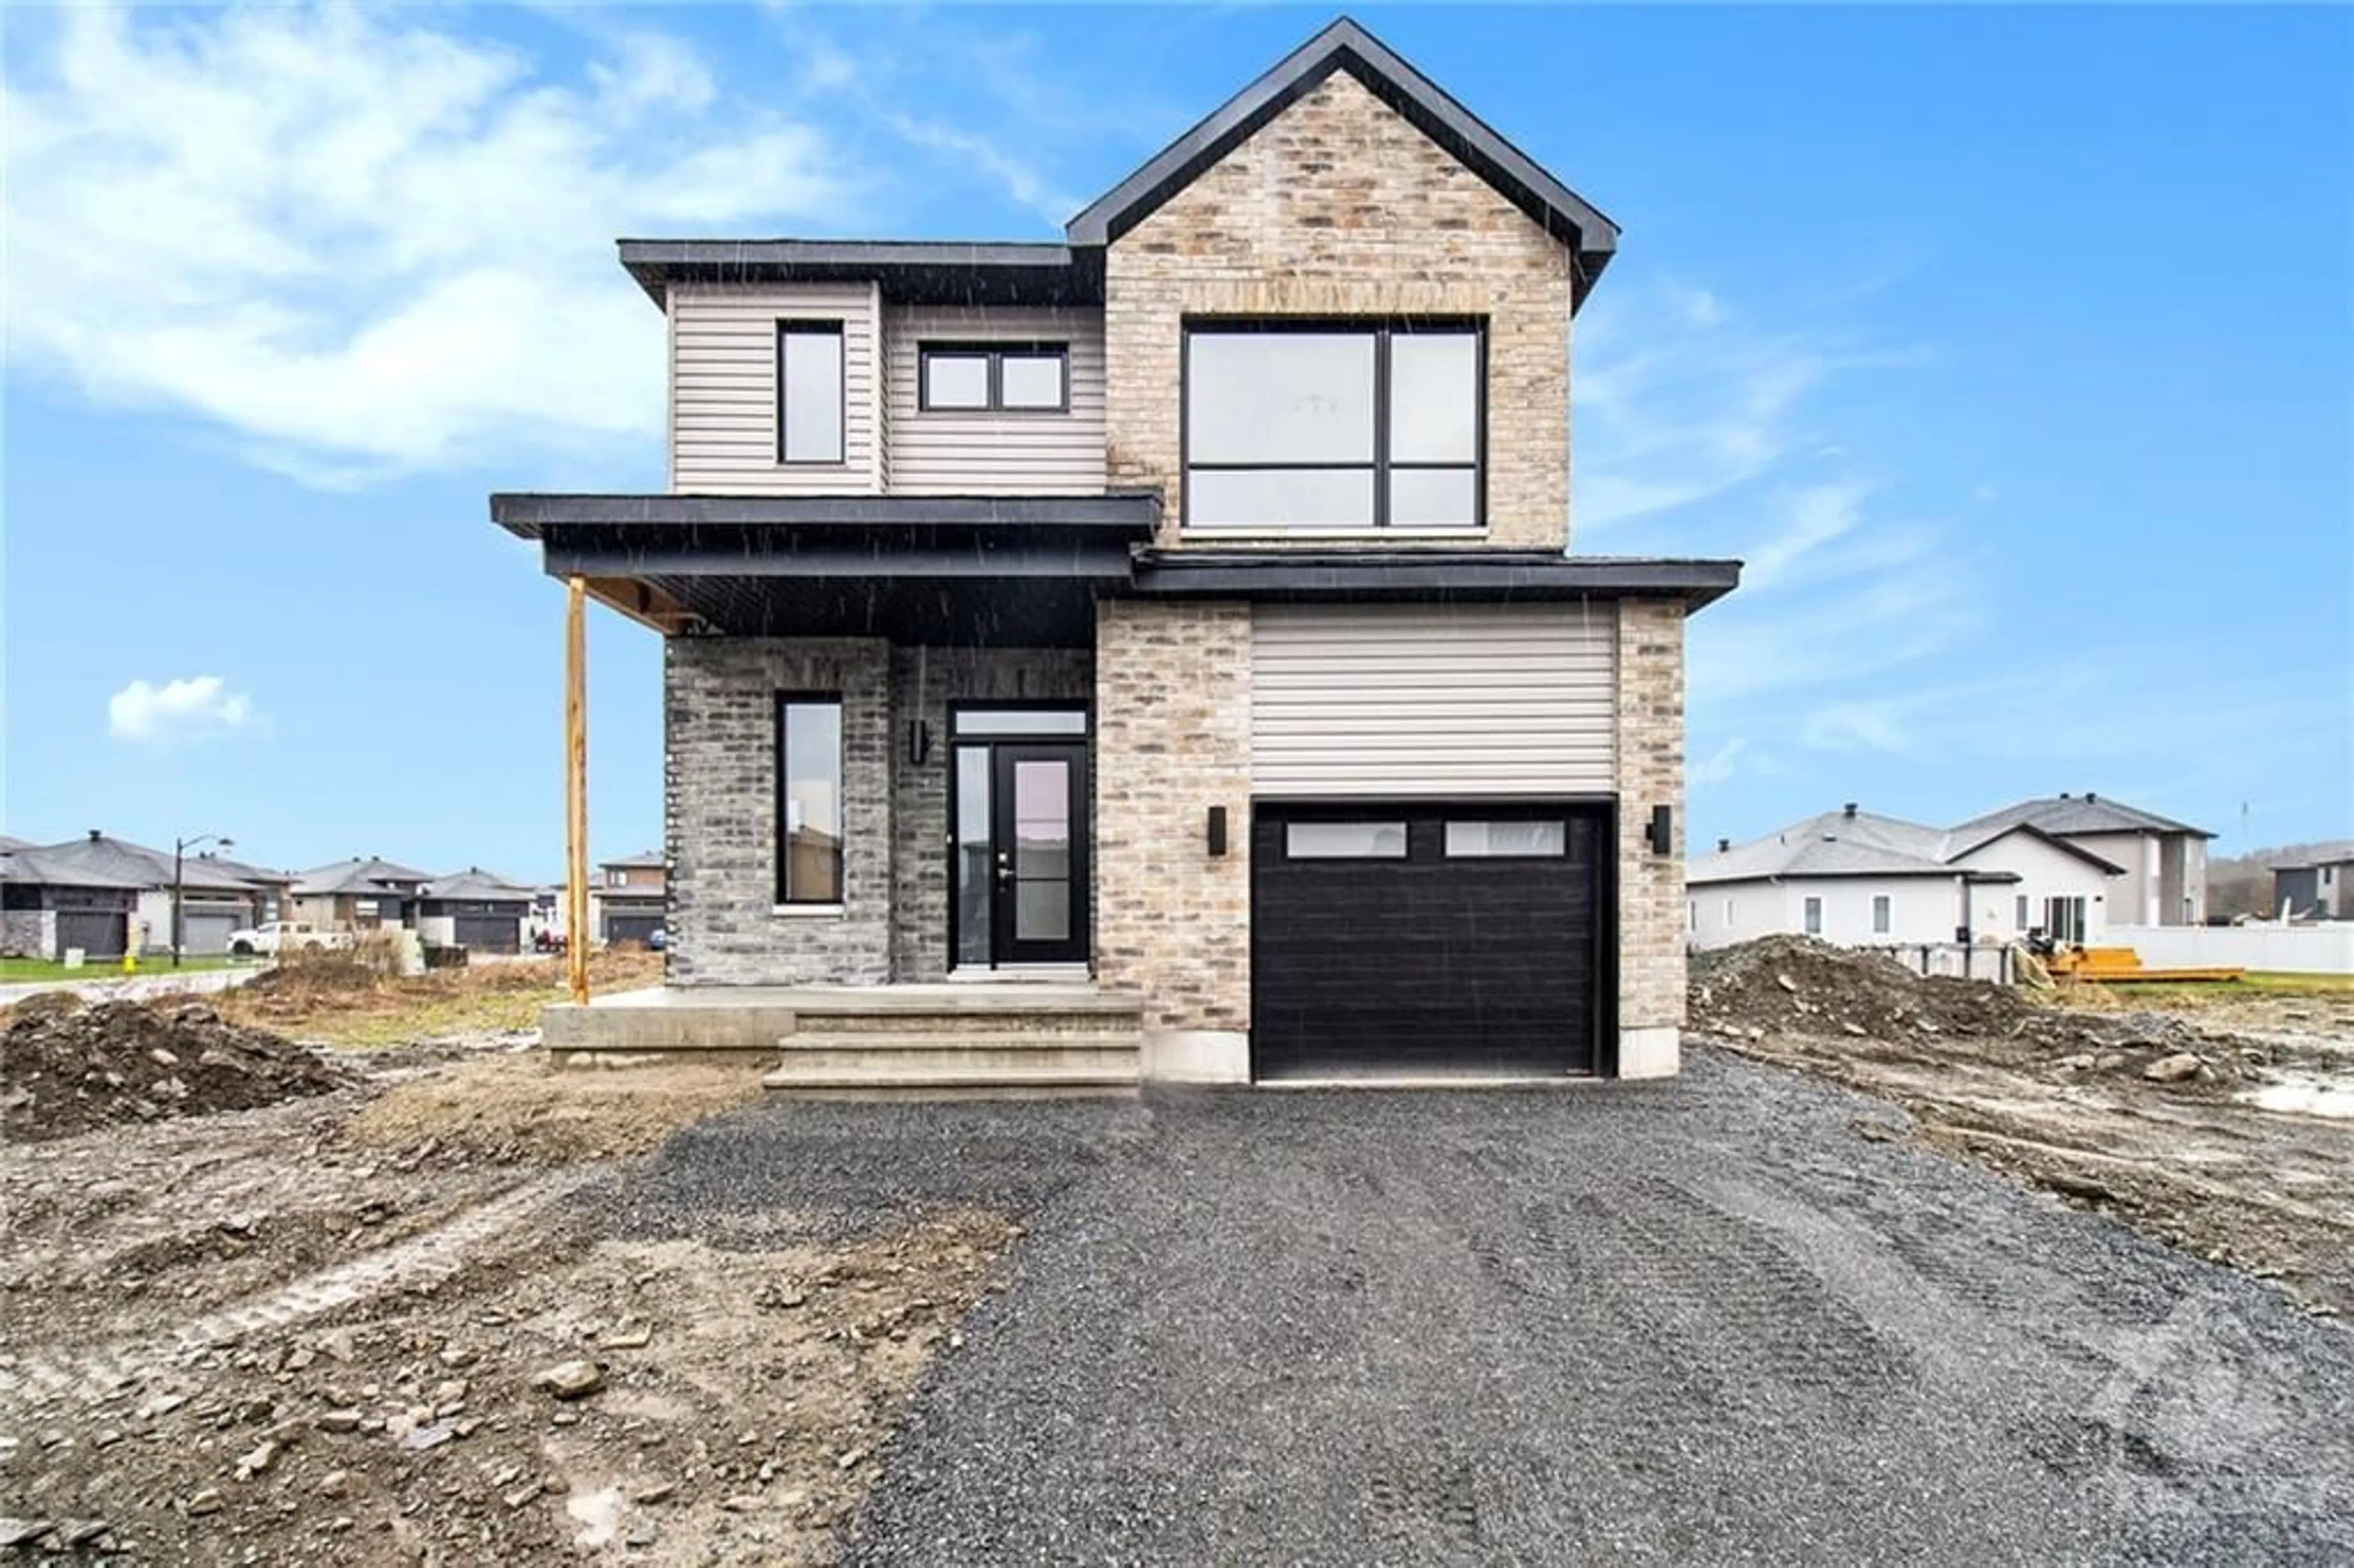 Home with brick exterior material for 15 RUTILE St, Rockland Ontario K4K 0M6